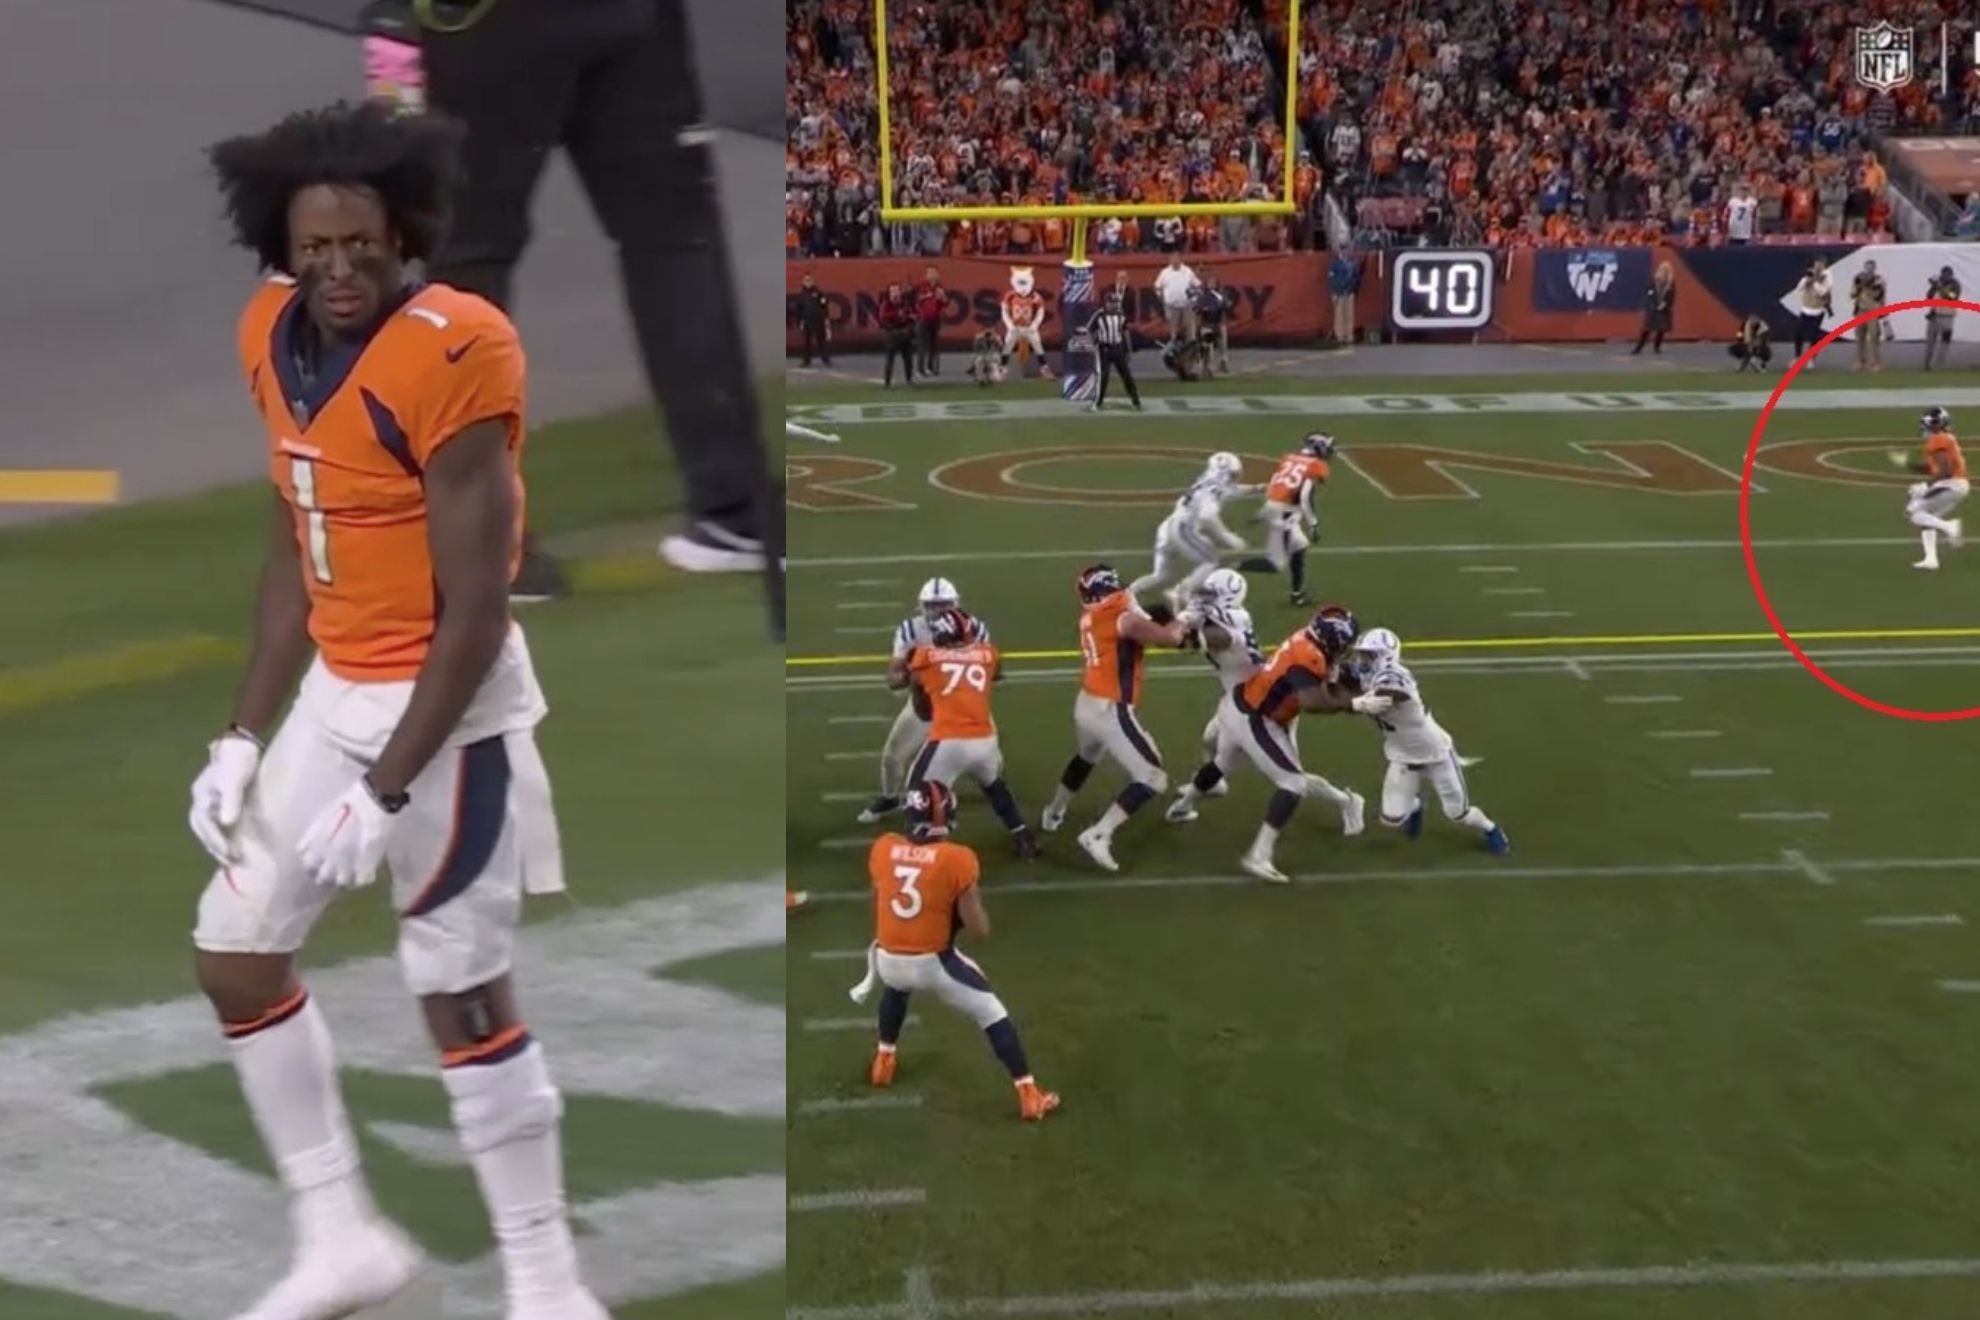 HK Hamler, angry to have been ignored after getting wide open on a short 4th and 1 call in Denver. - TNFP